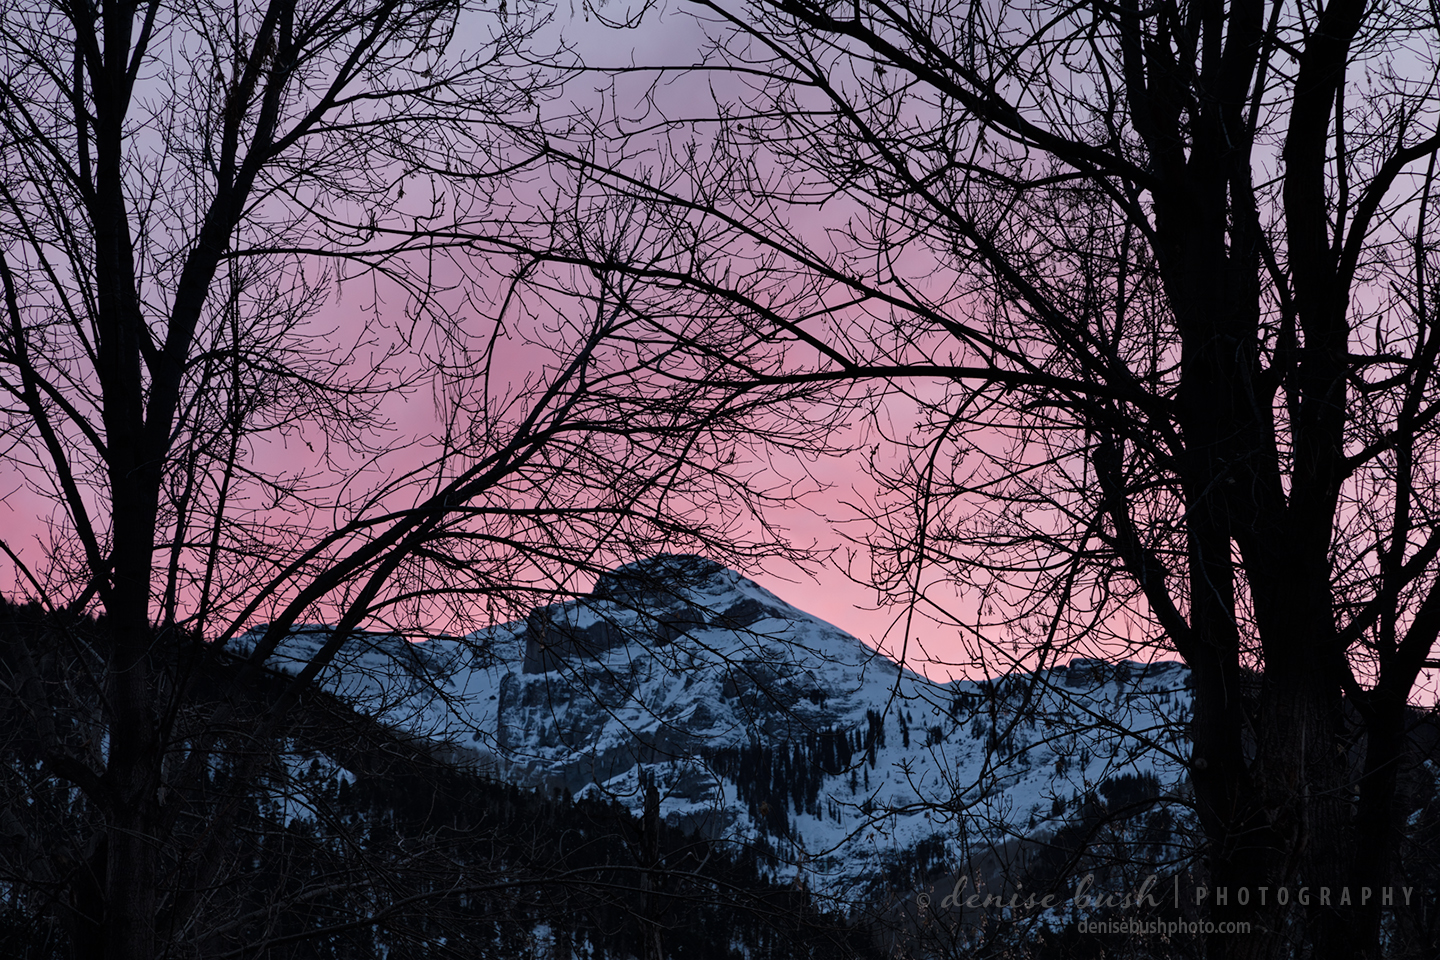 A pink sunset creates a pretty mountain scene as seen through tree branches.